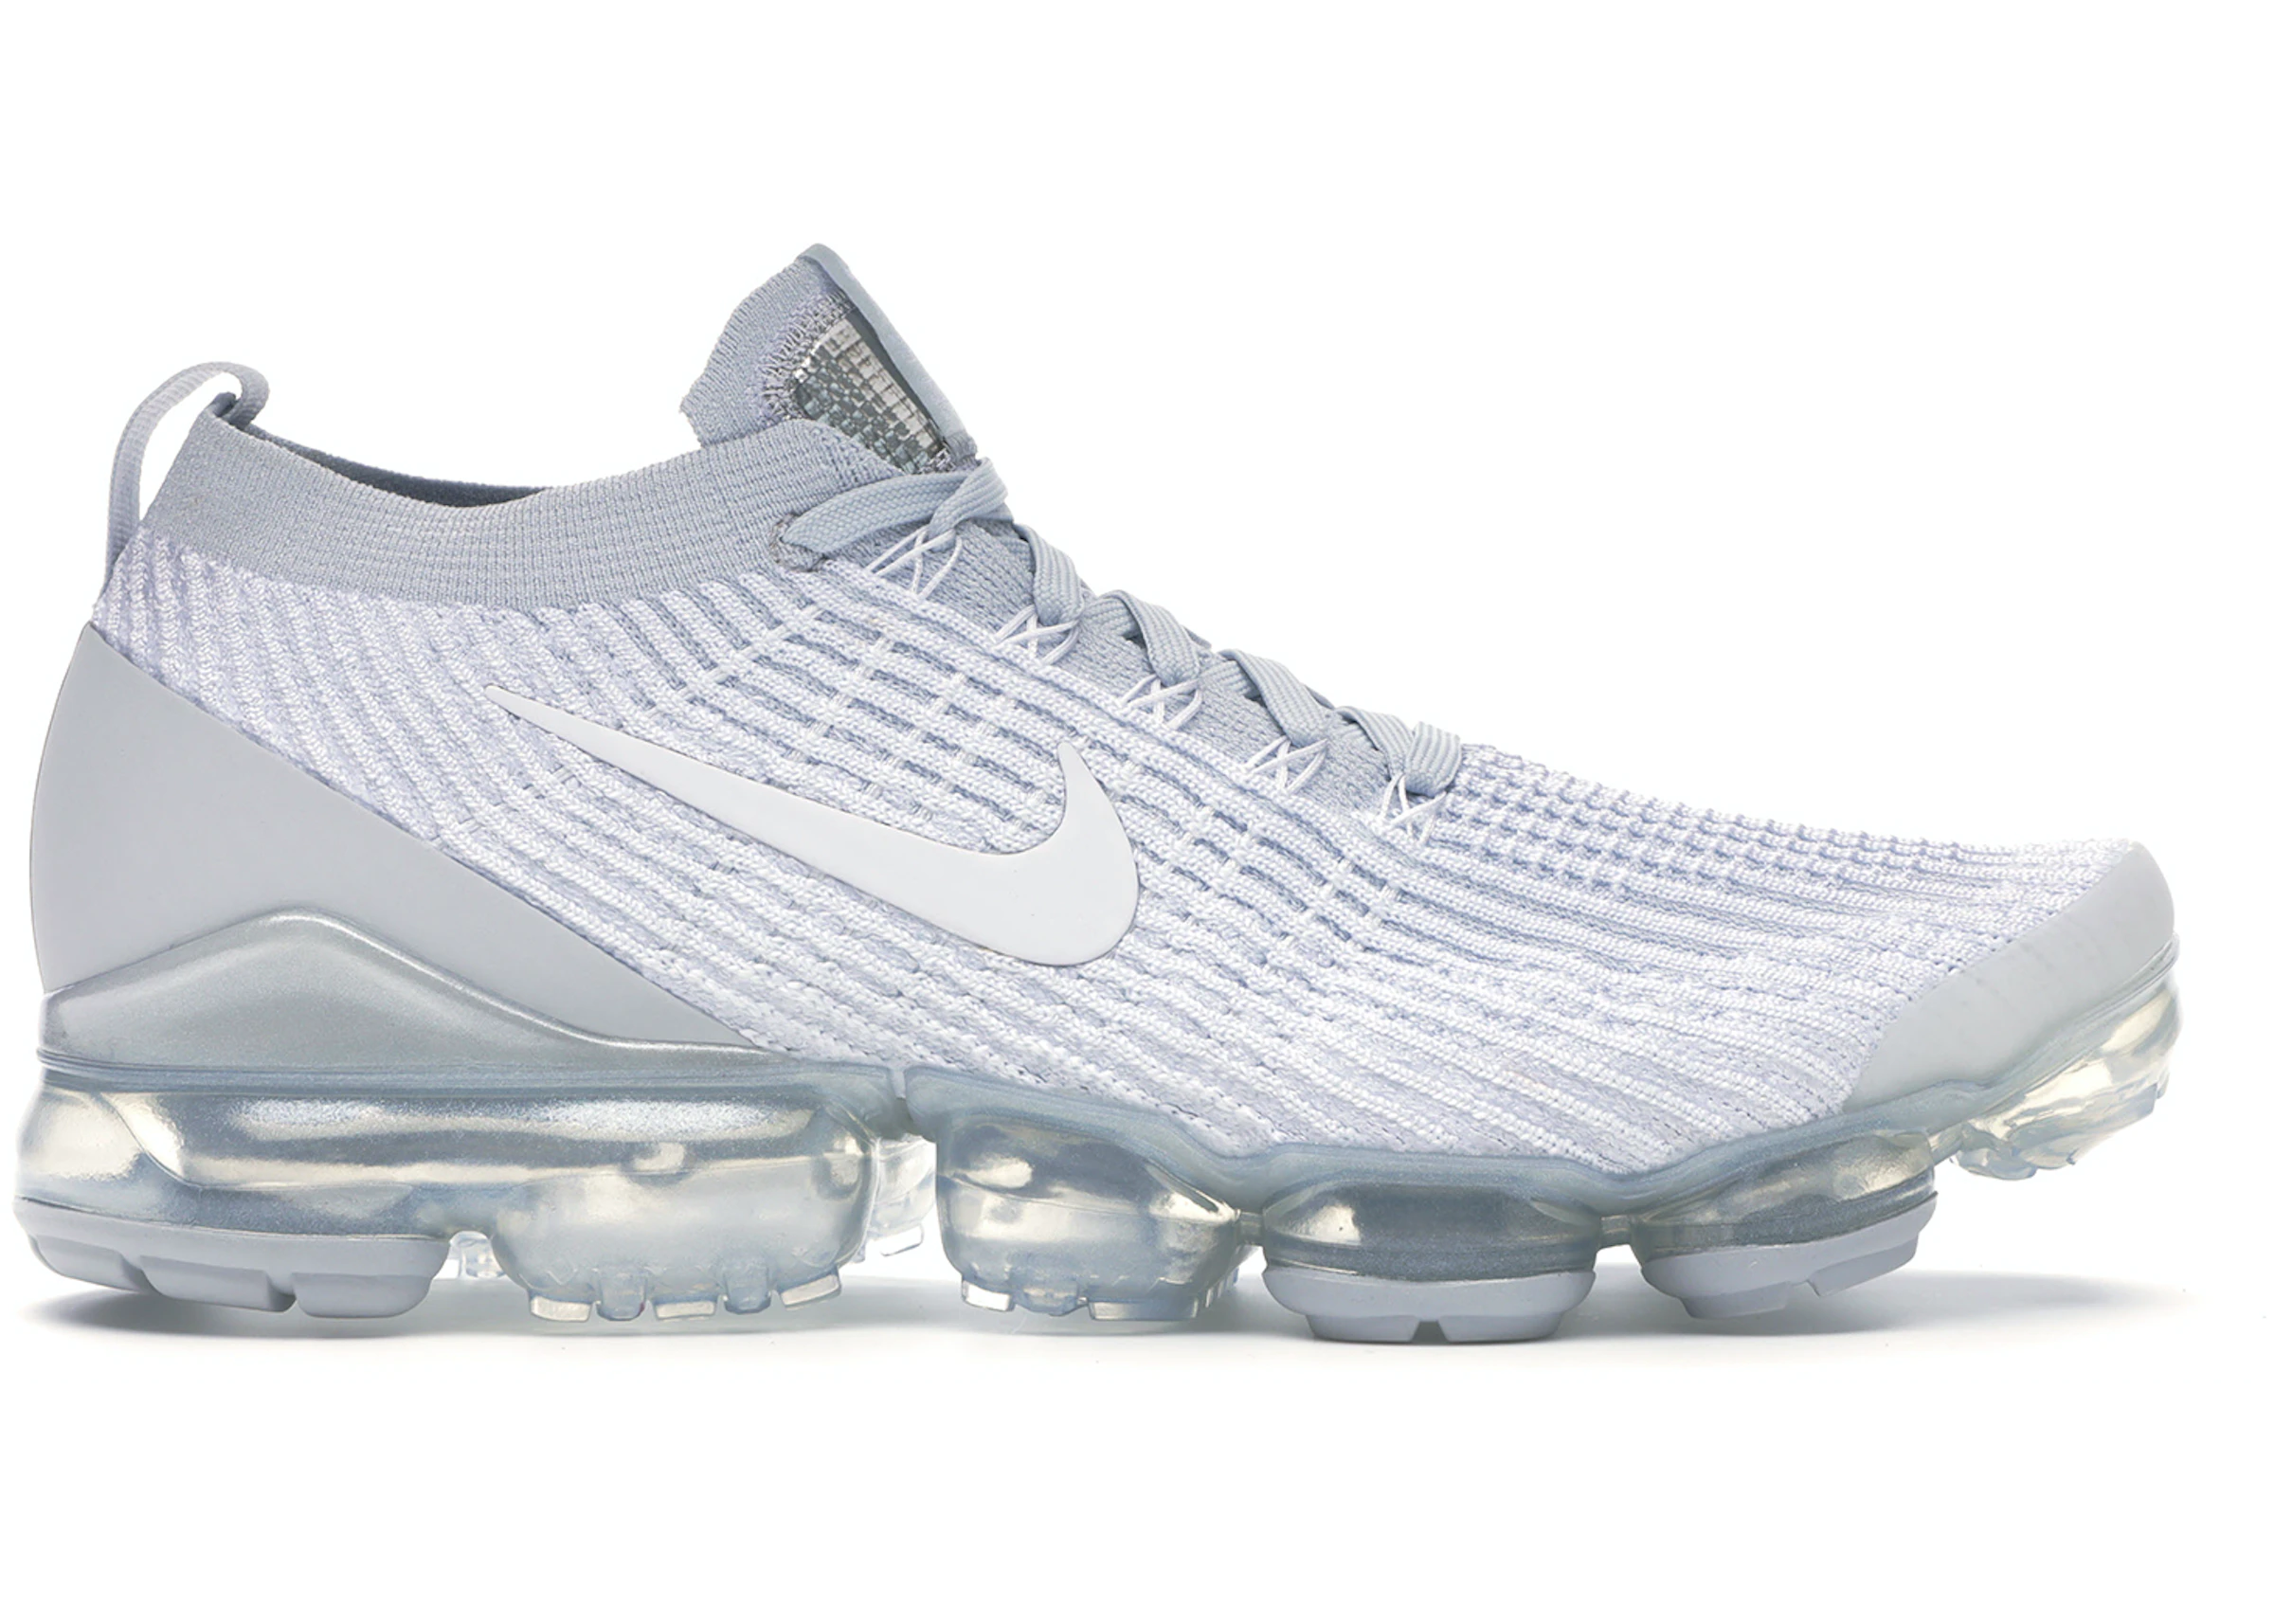 Buy Nike Air Max Vapormax Shoes & New Sneakers - Stockx